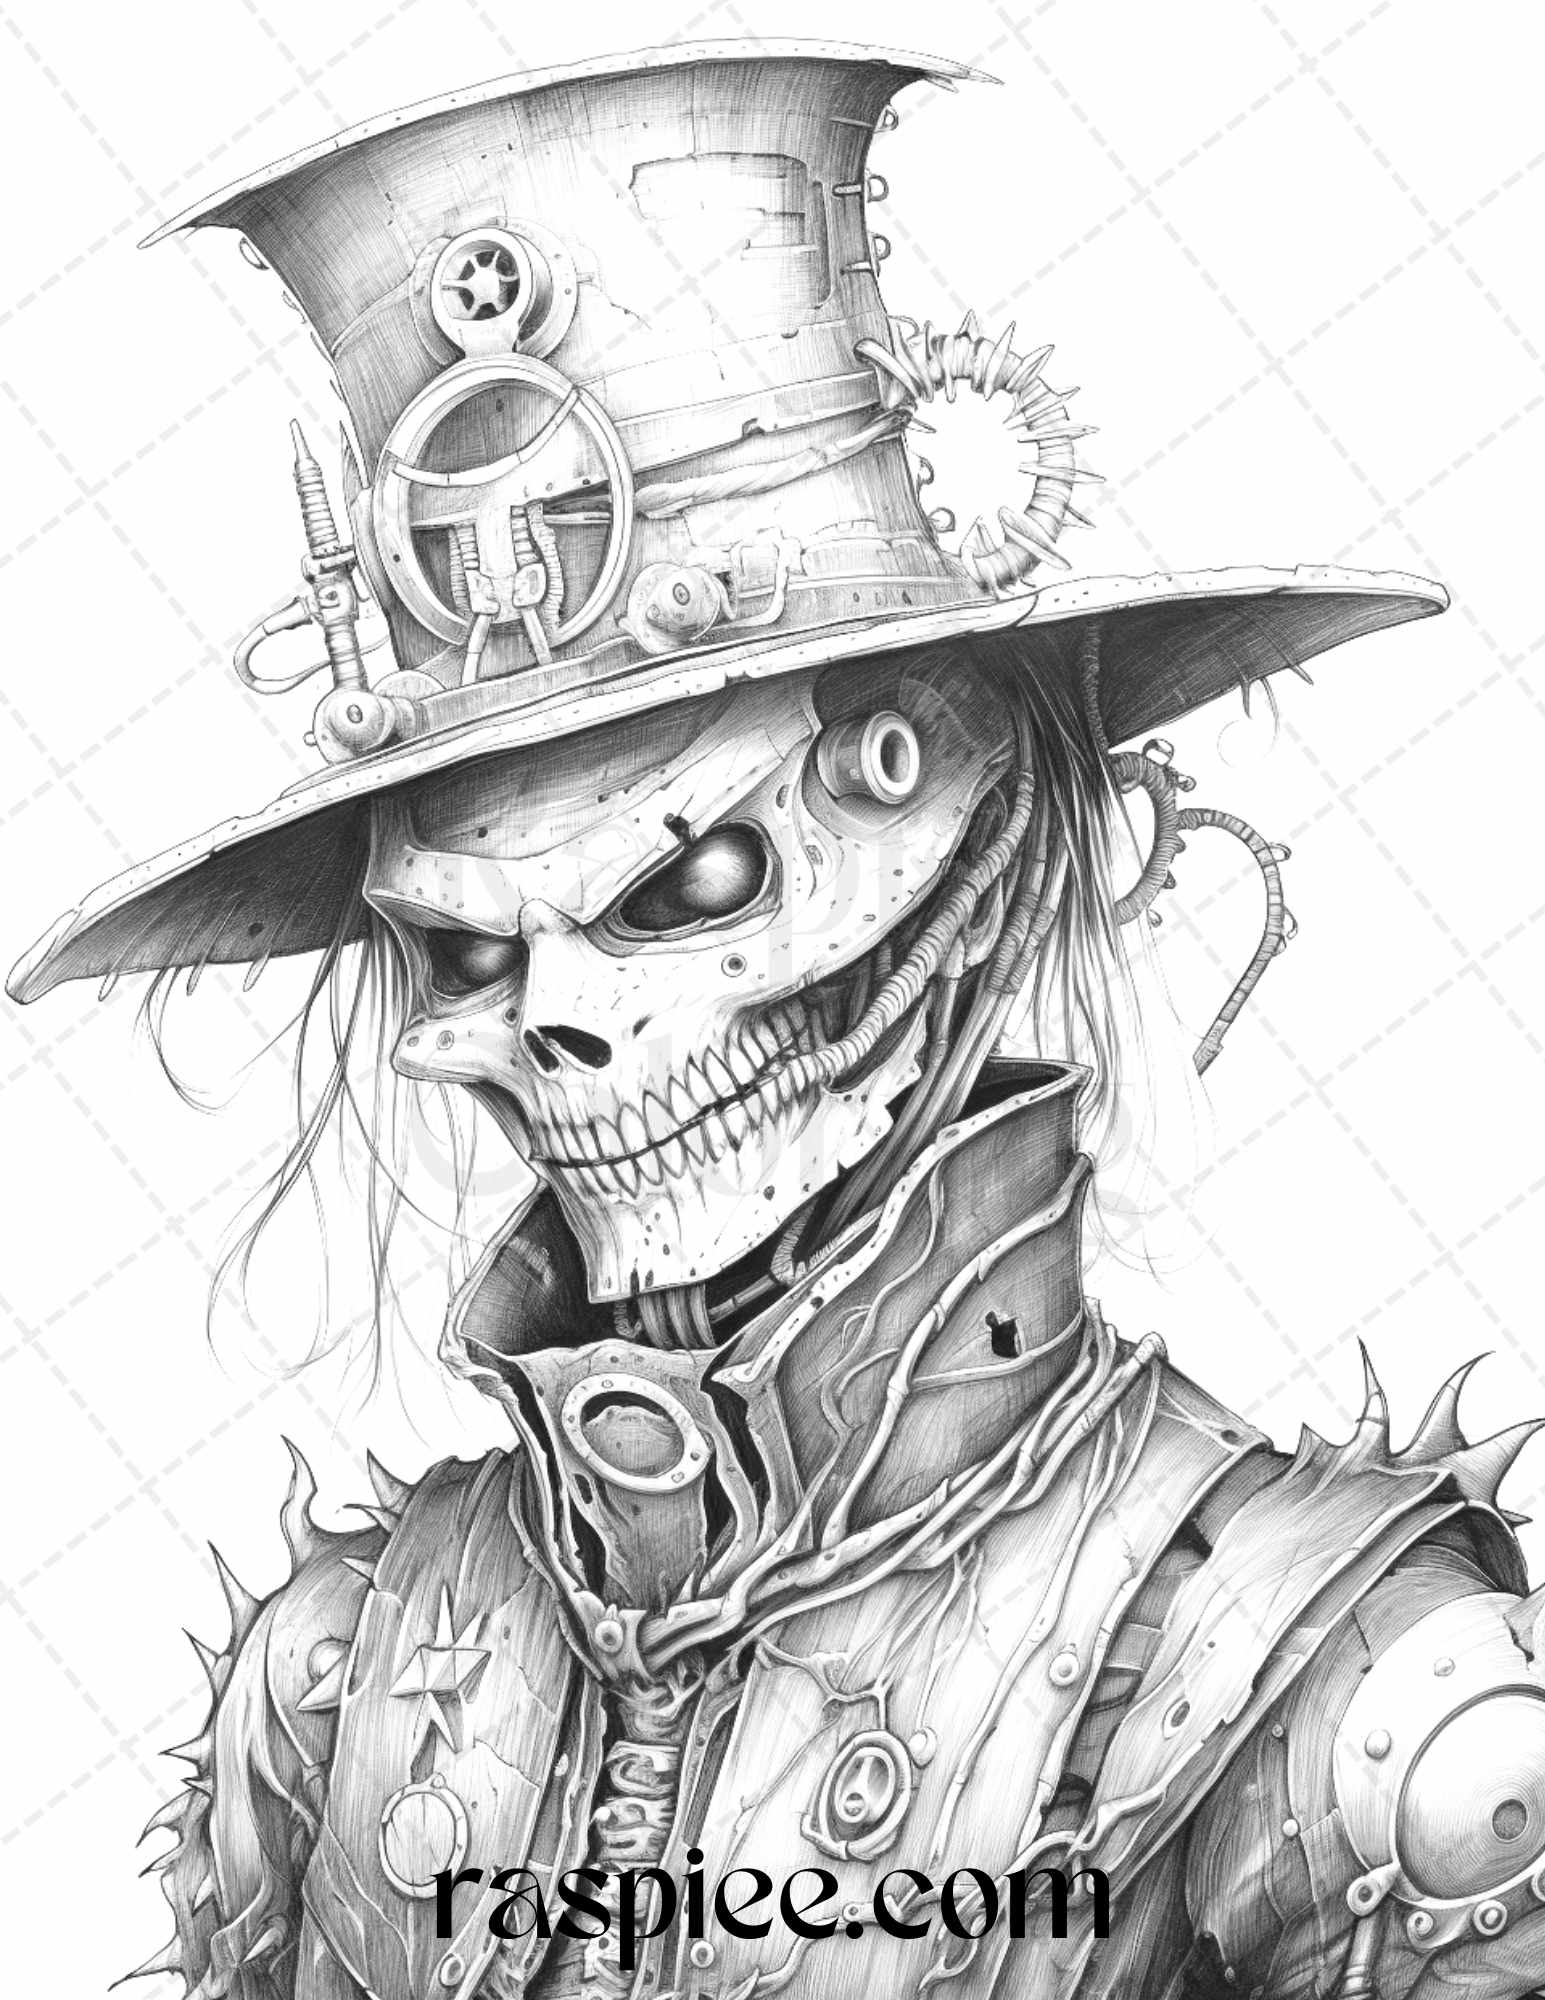 Scary Steampunk Scarecrow Coloring Page, Halloween Grayscale Coloring Printable, Intricate Adult Coloring Illustration, Detailed Gothic Coloring Page, Halloween-Themed DIY Coloring, Printable Creepy Halloween Decor